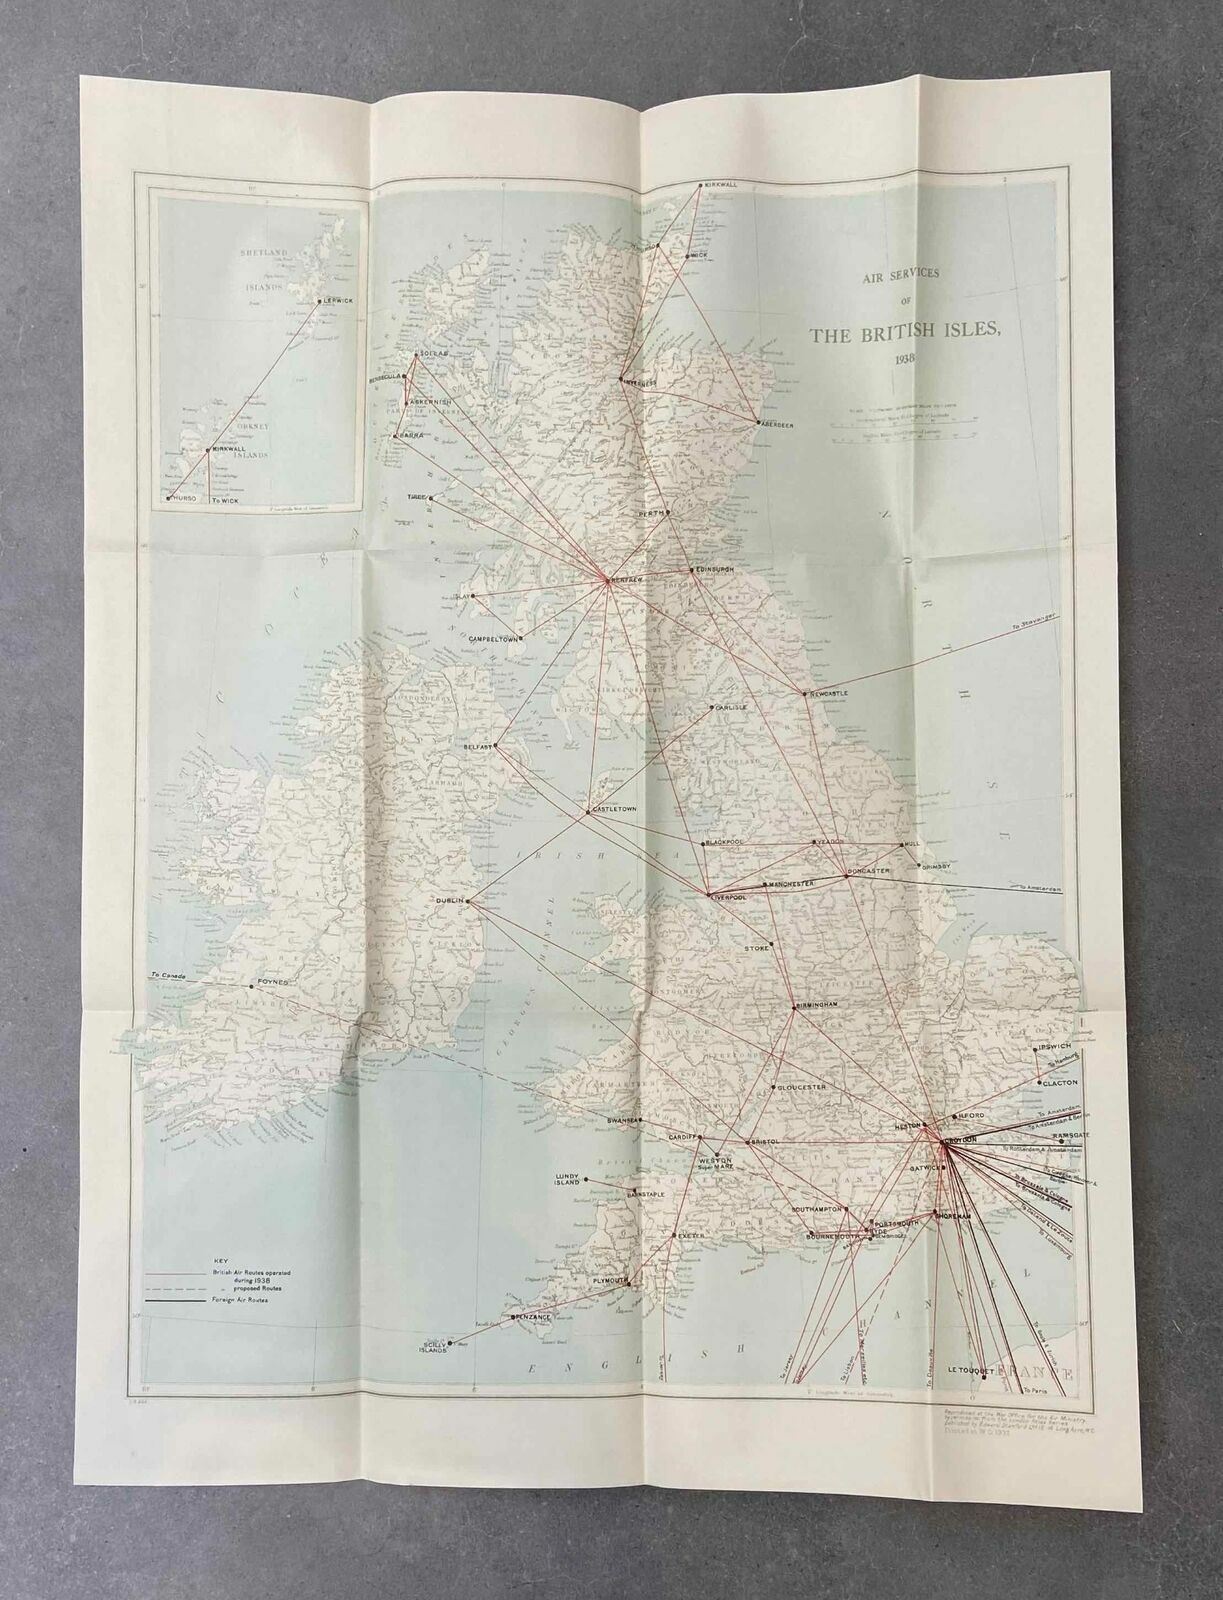 AIR SERVICES OF THE BRITISH ISLES 1938 LARGE VINTAGE AVIATION AIRLINE ROUTE MAP